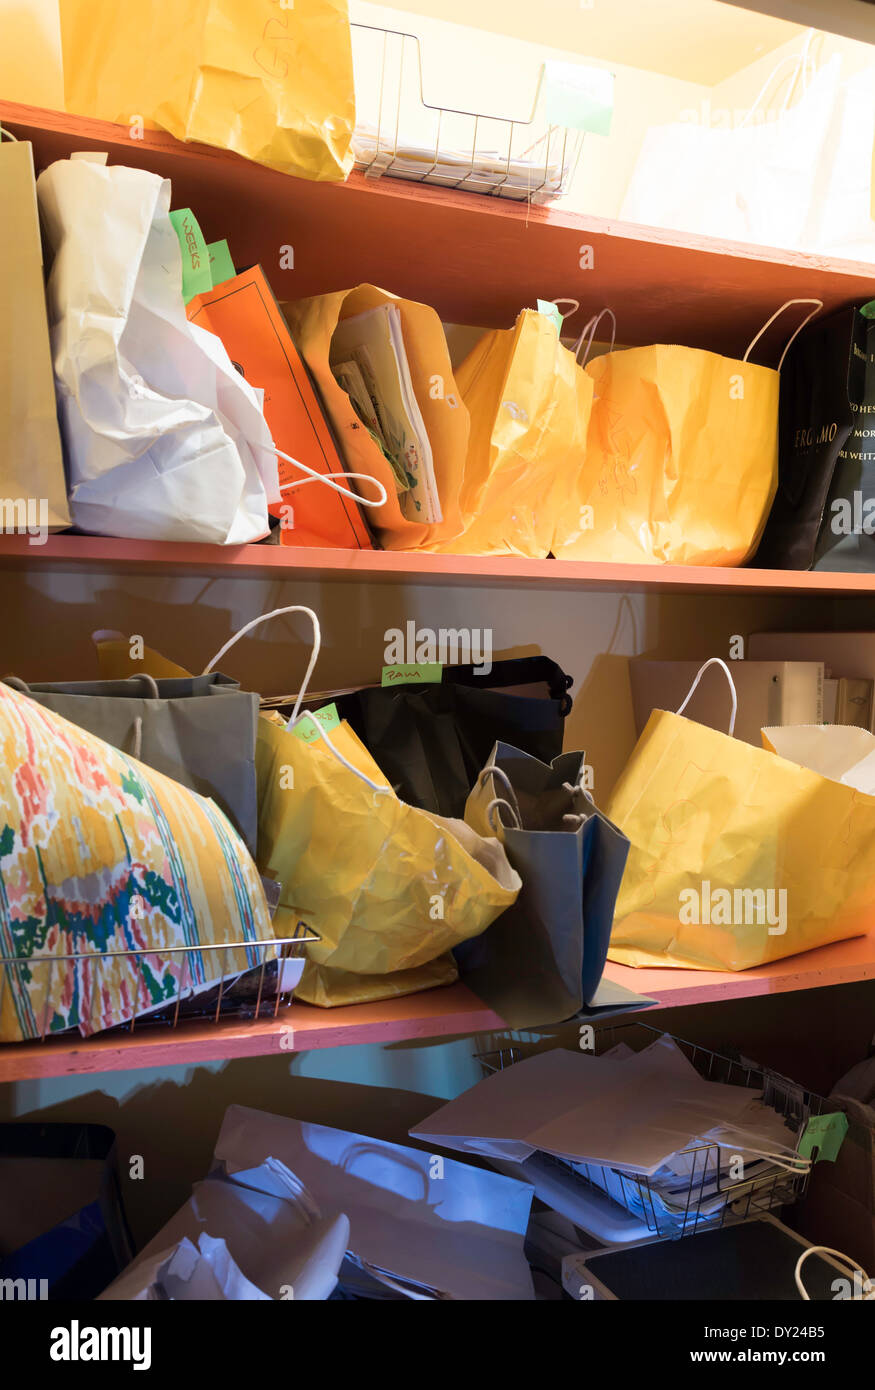 Bags Stuffed on Shelves in Hoarders' Messy Office, USA Stock Photo